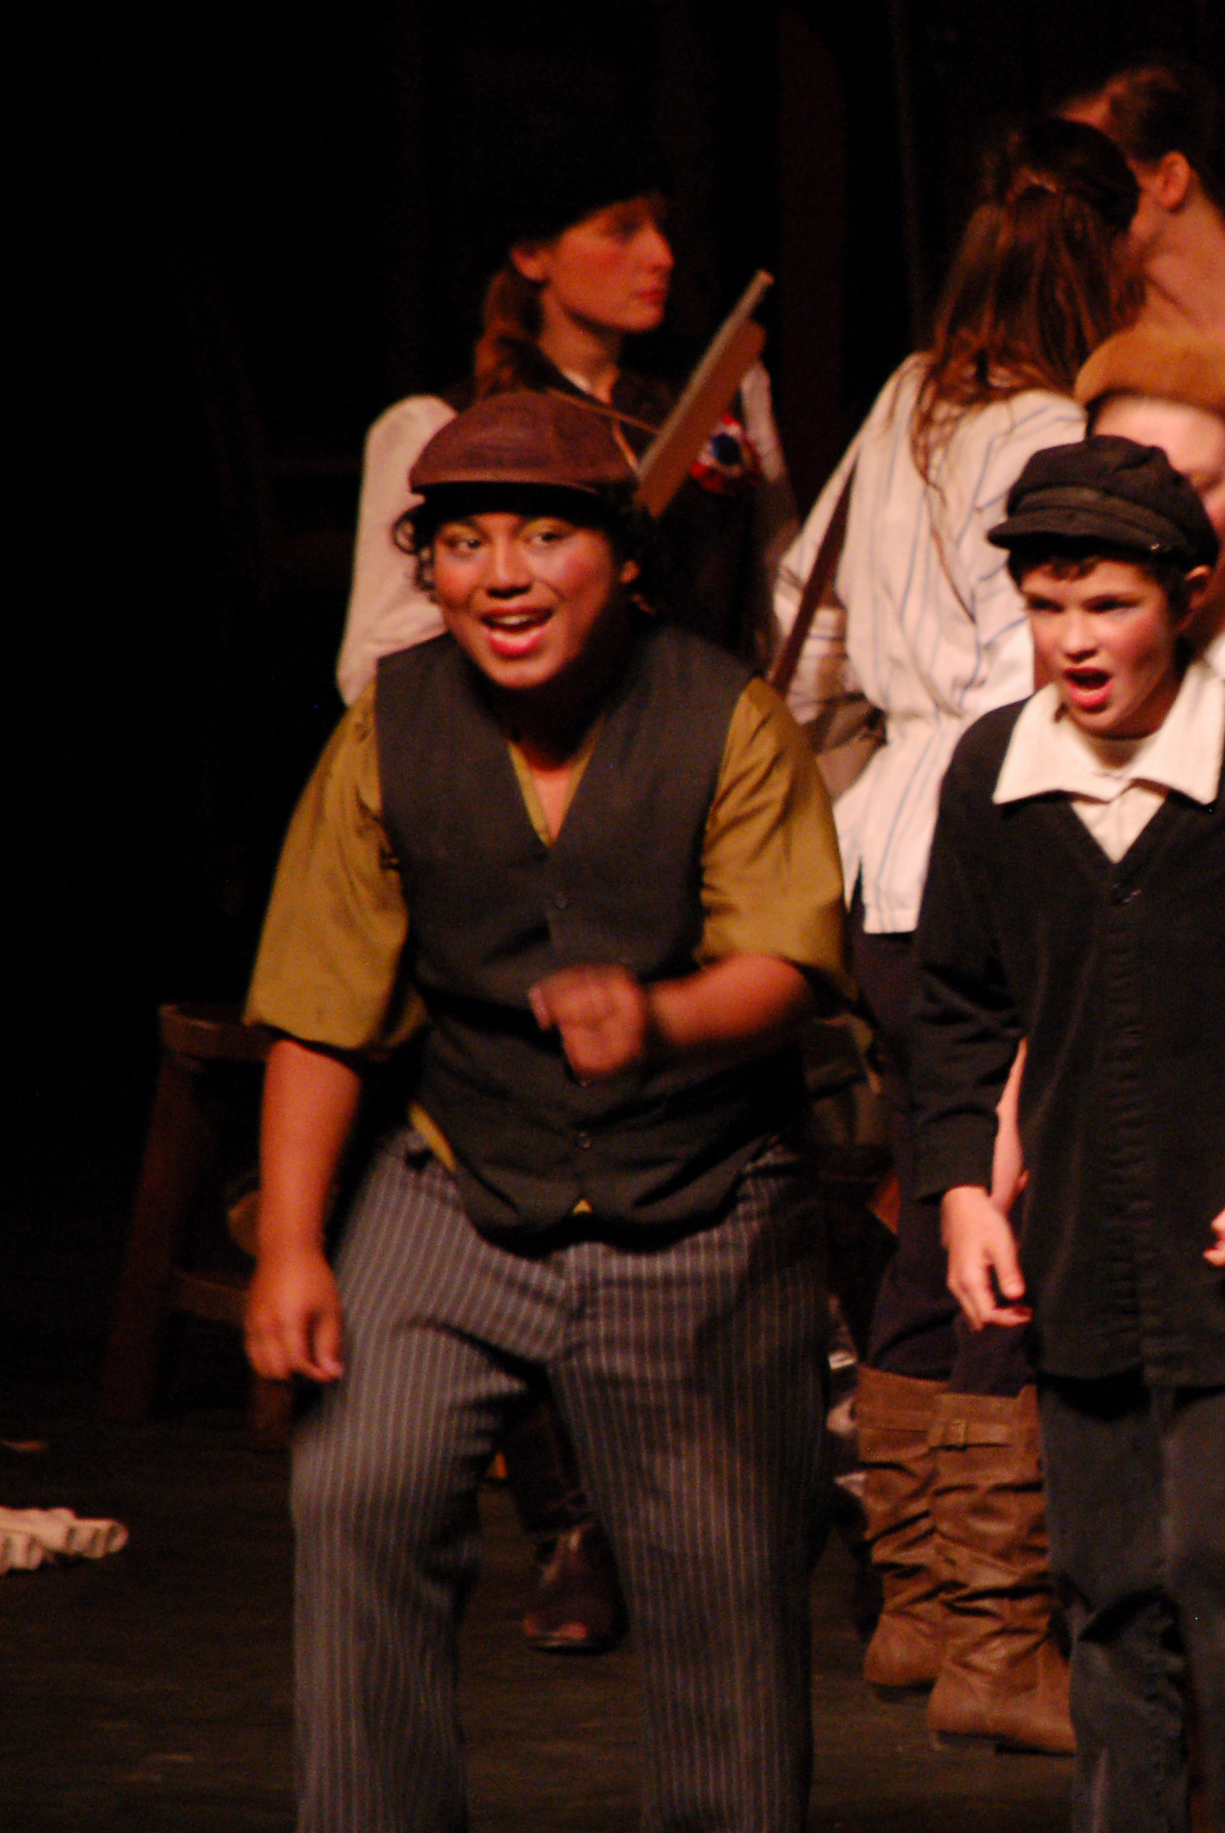 Falcom Greear, performing in the October 2014 production of “Les Miserables.”